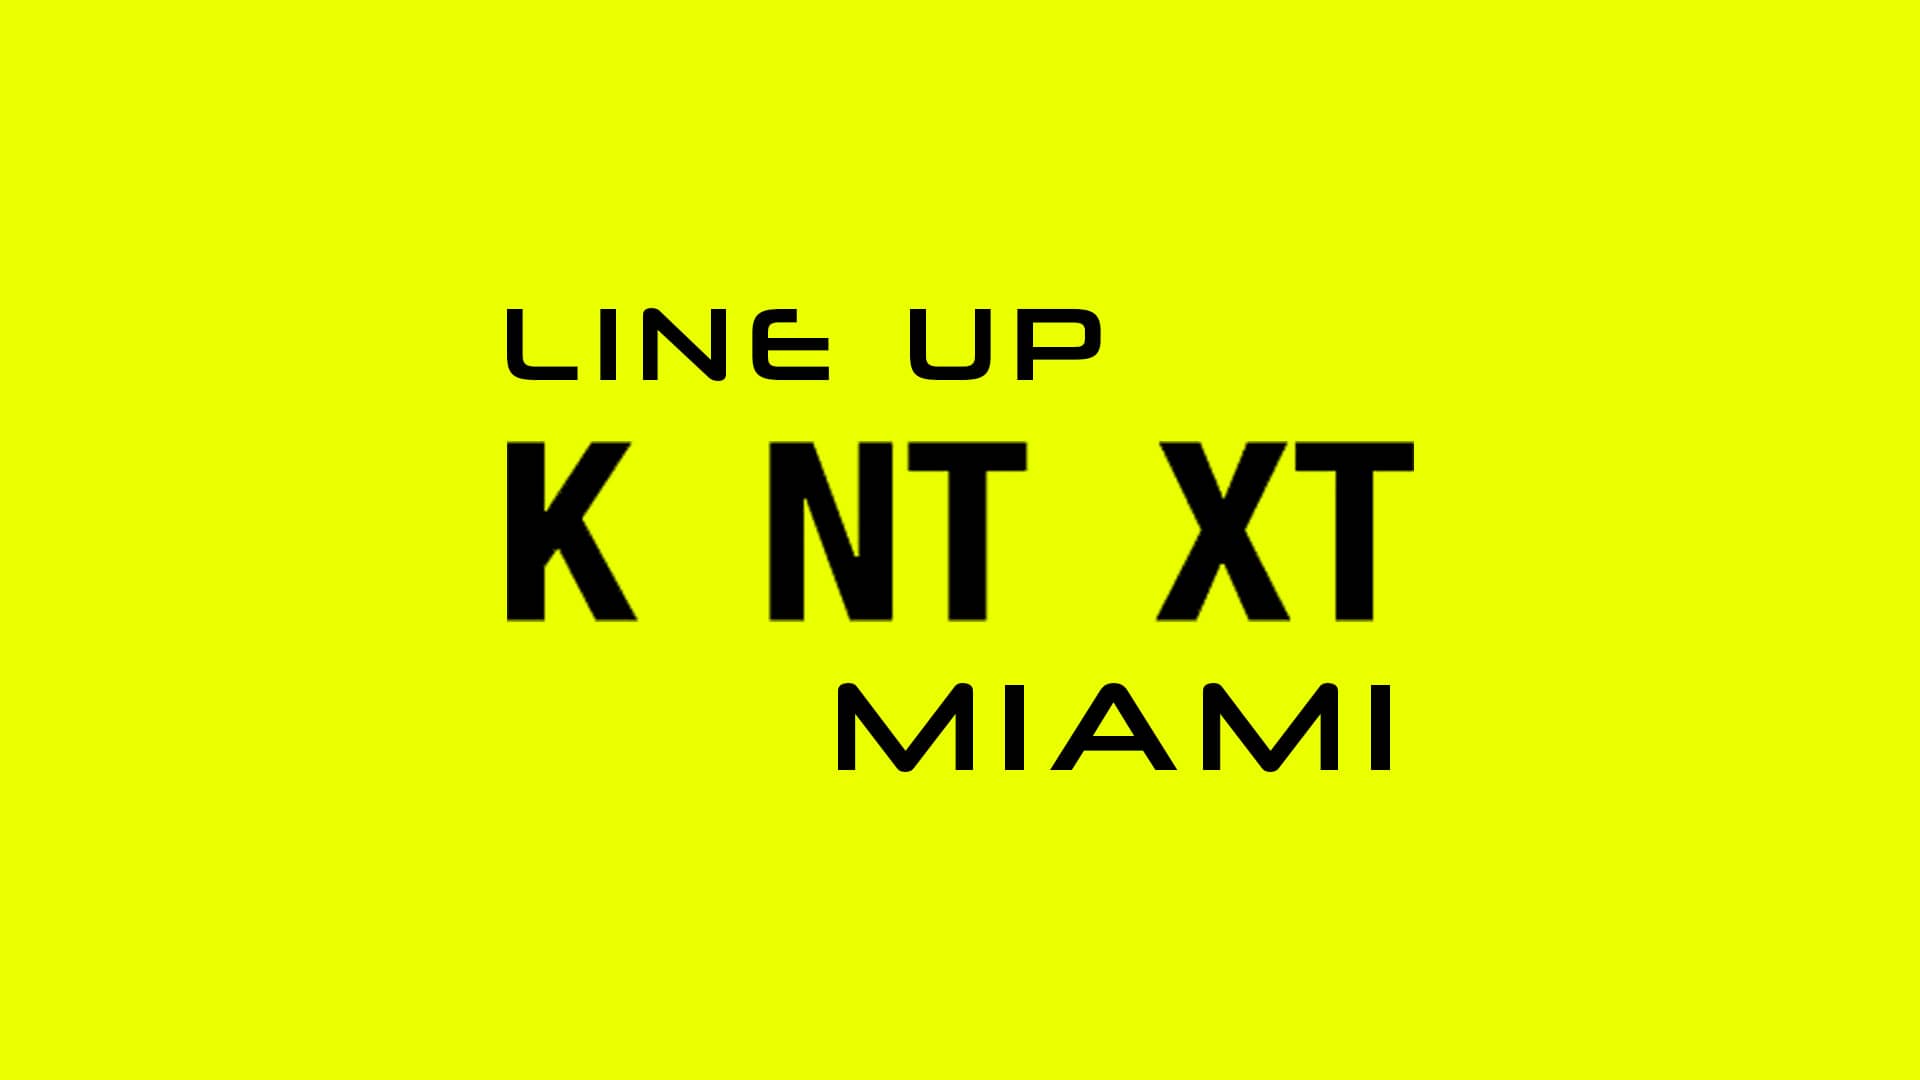 The powerful force of techno comes to Miami with the KNTXT music and events label.